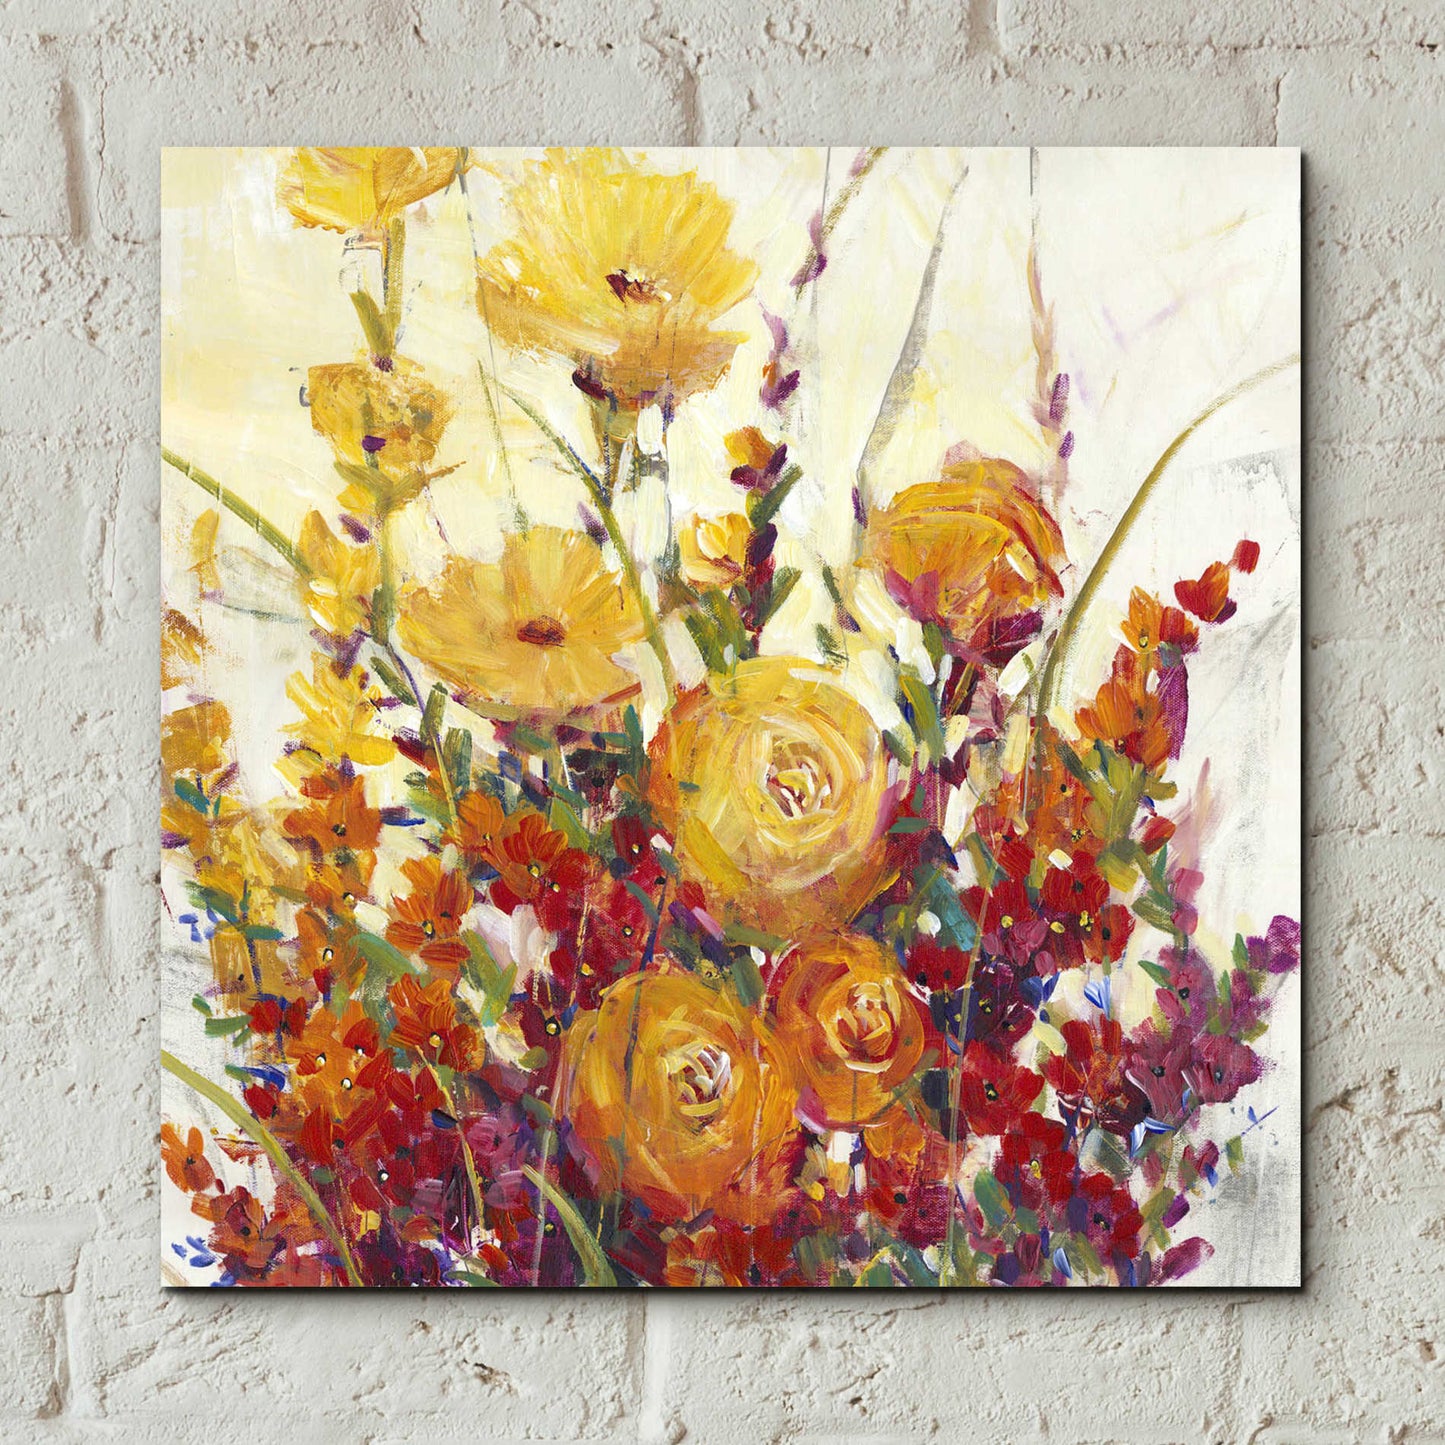 Epic Art 'Mixed Bouquet I' by Tim O'Toole, Acrylic Glass Wall Art,12x12